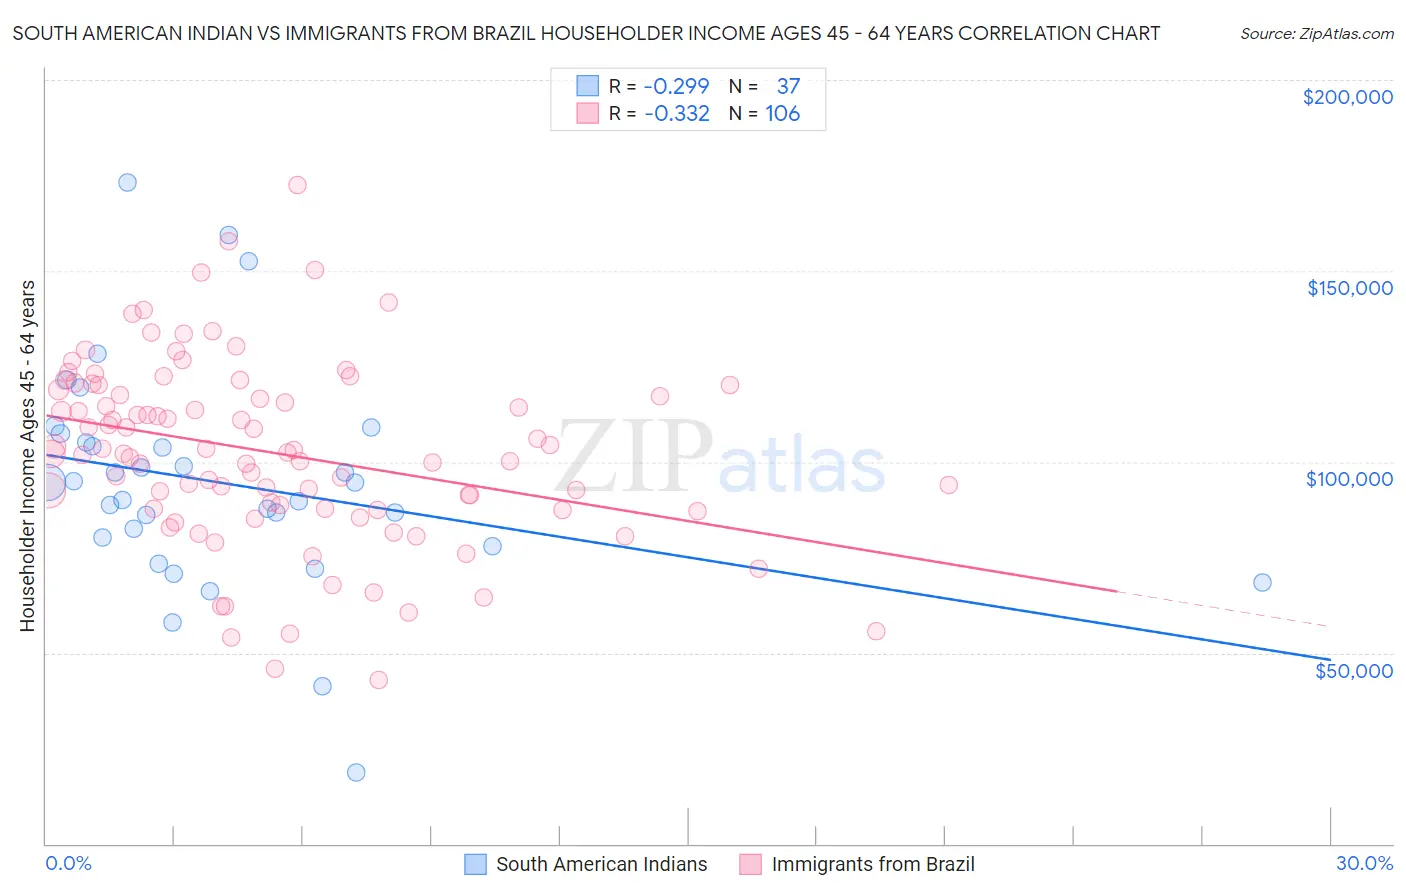 South American Indian vs Immigrants from Brazil Householder Income Ages 45 - 64 years